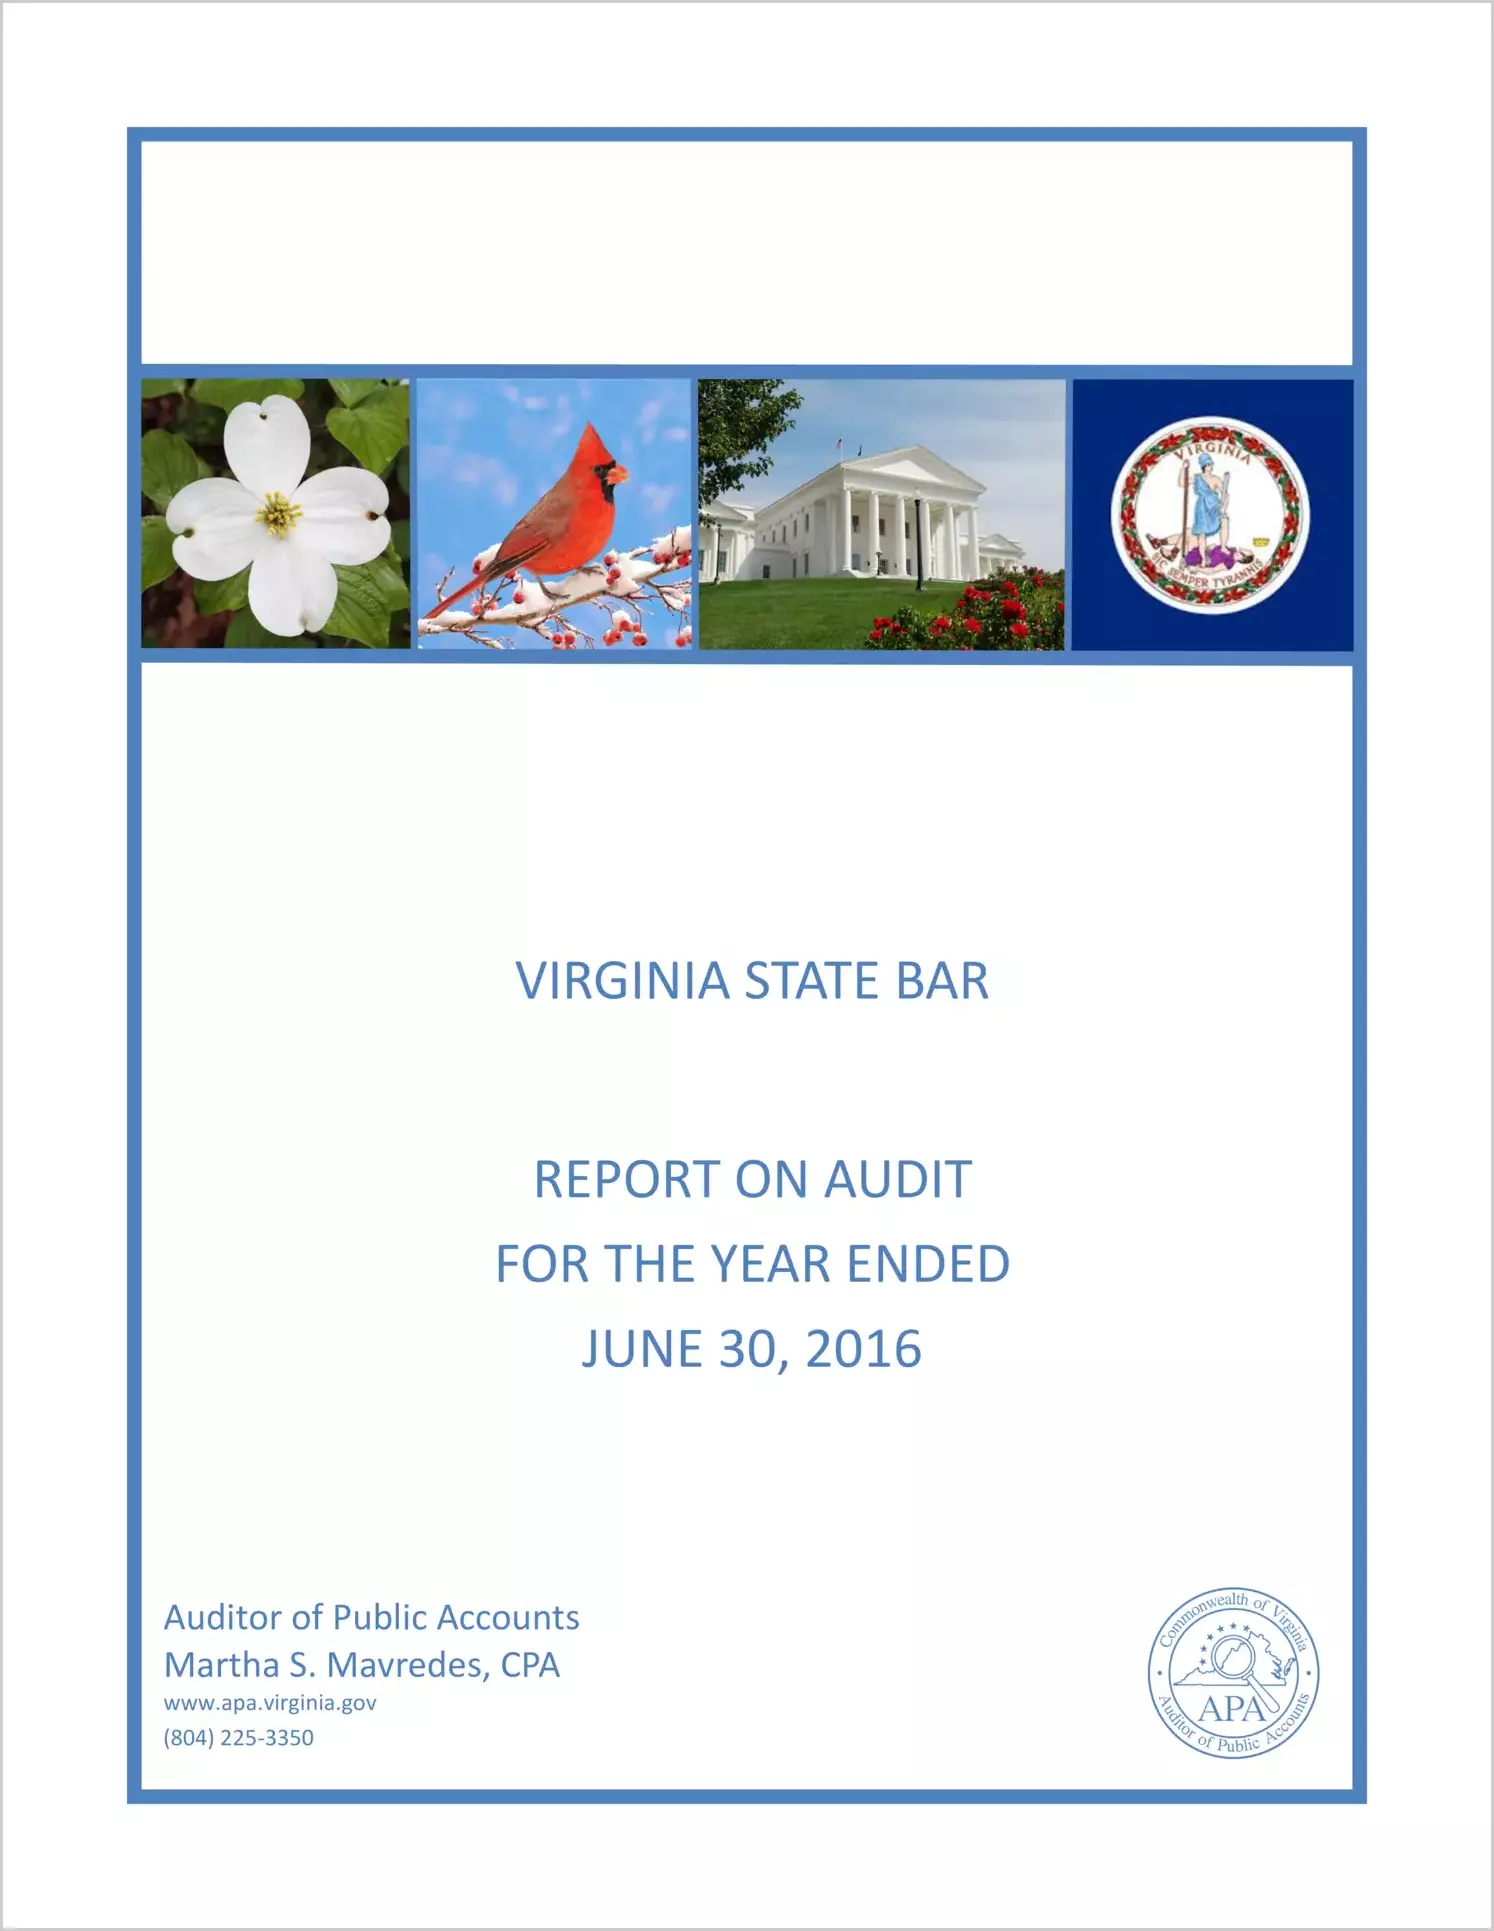 Virginia State Bar for the year ended June 30, 2016